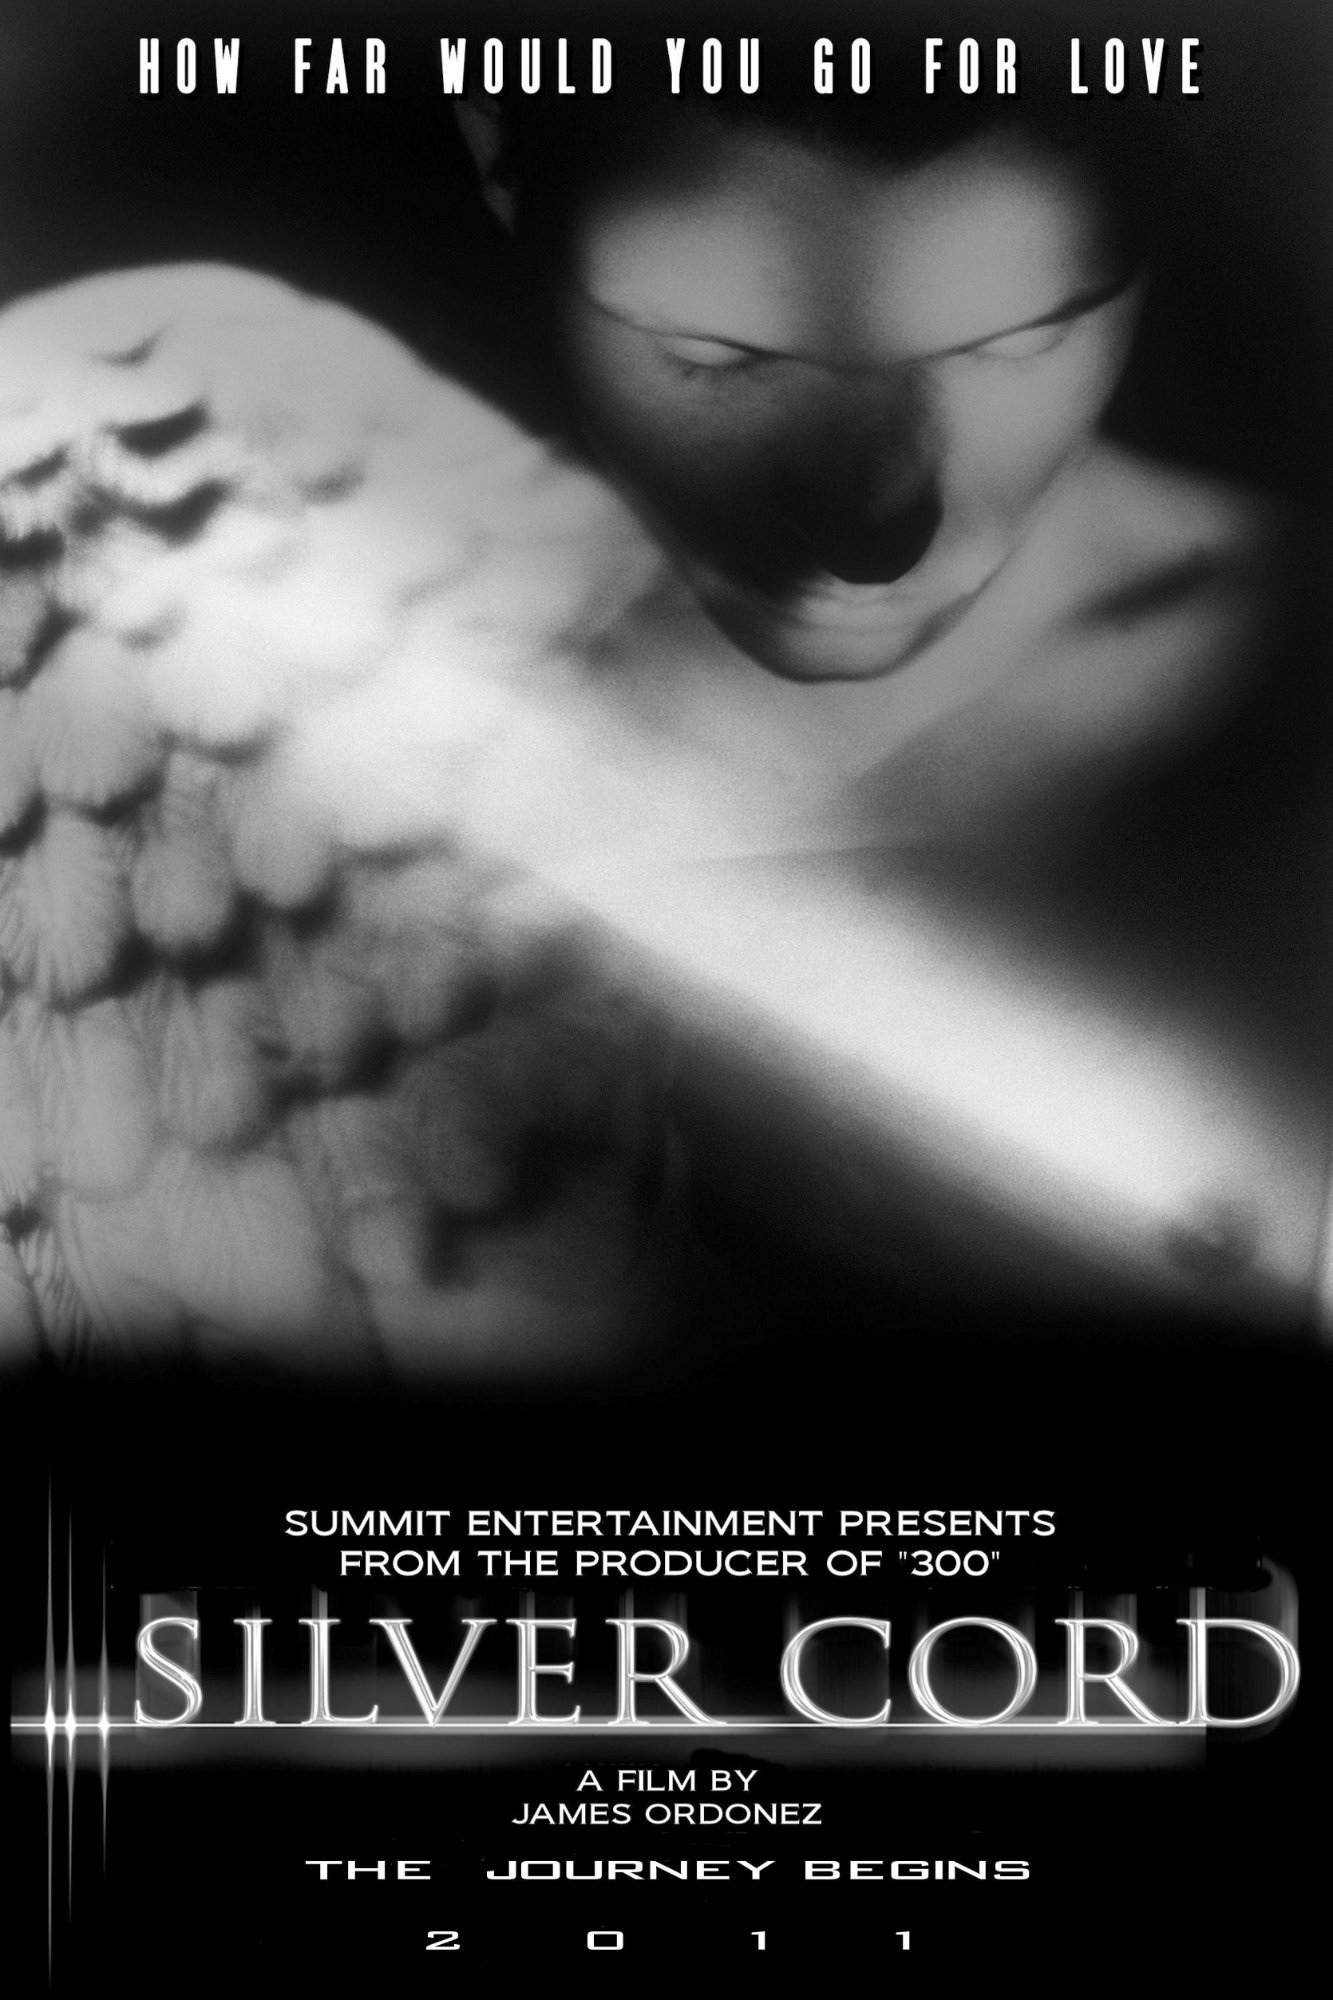 Poster of Summit Entertainment's Silver Cord (2011)